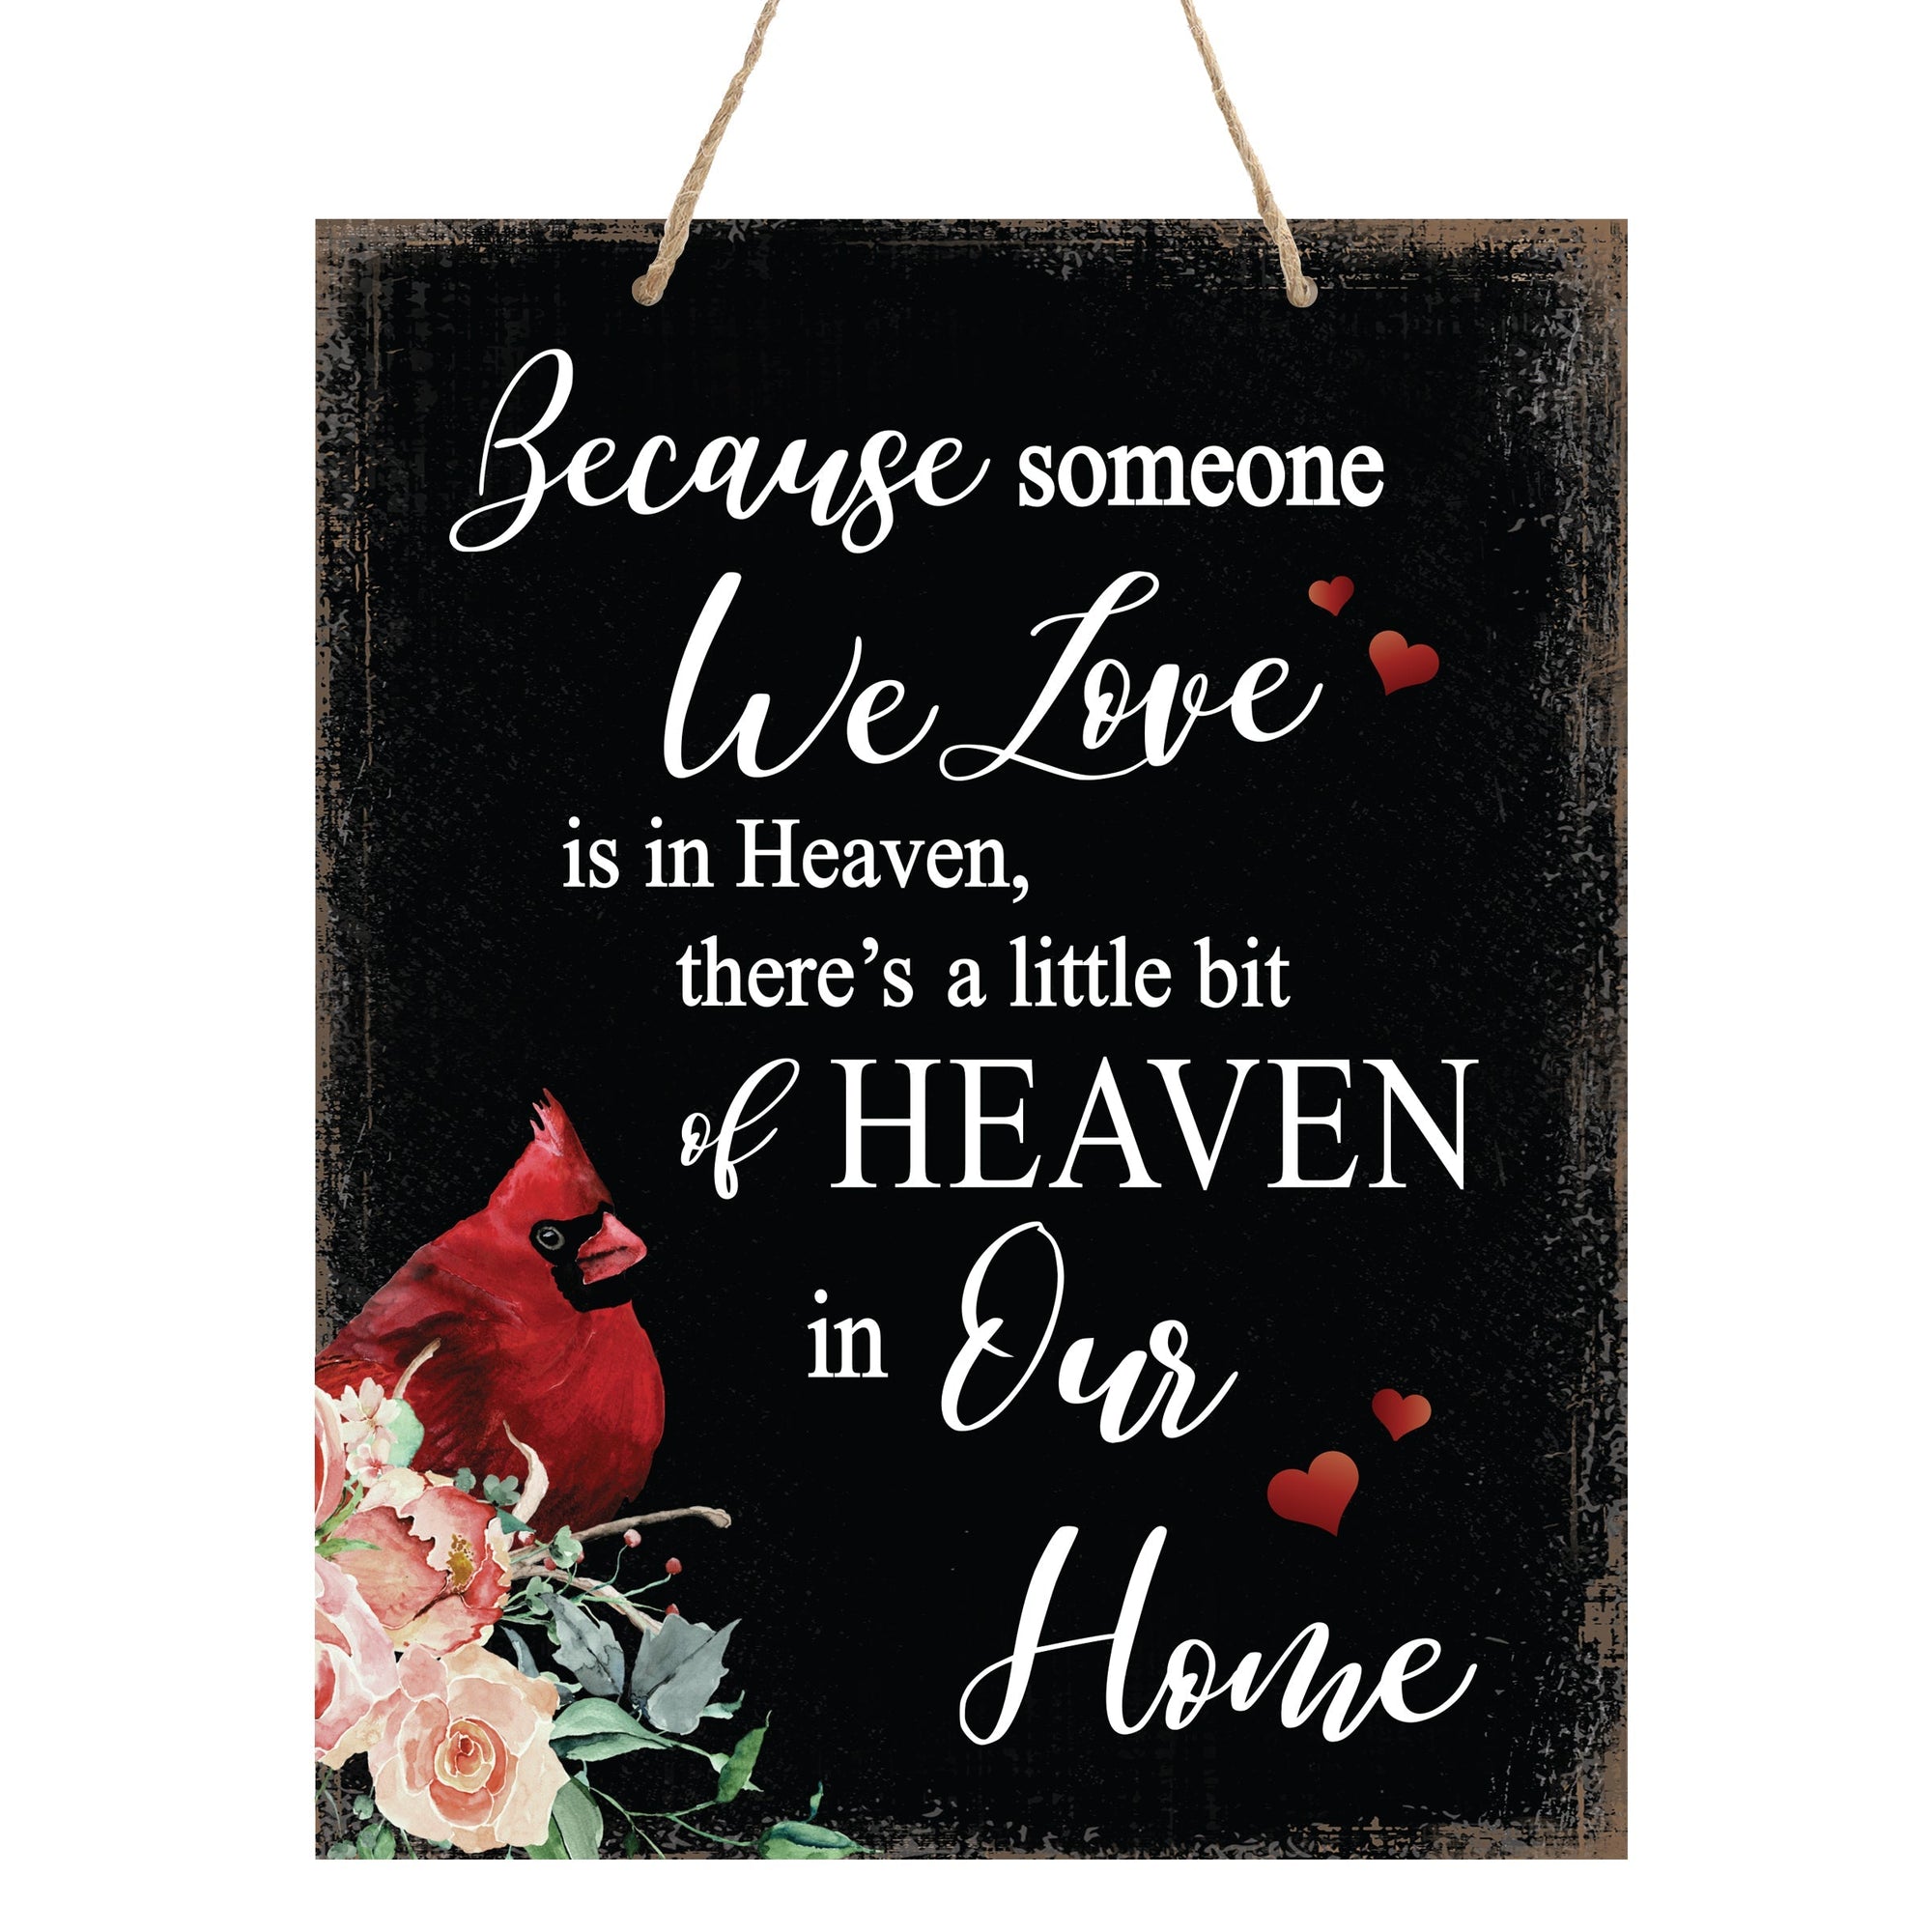 A wooden memorial ribbon sign featuring a cardinal ribbon, perfect for memorial decorations and loved one memorial gifts.